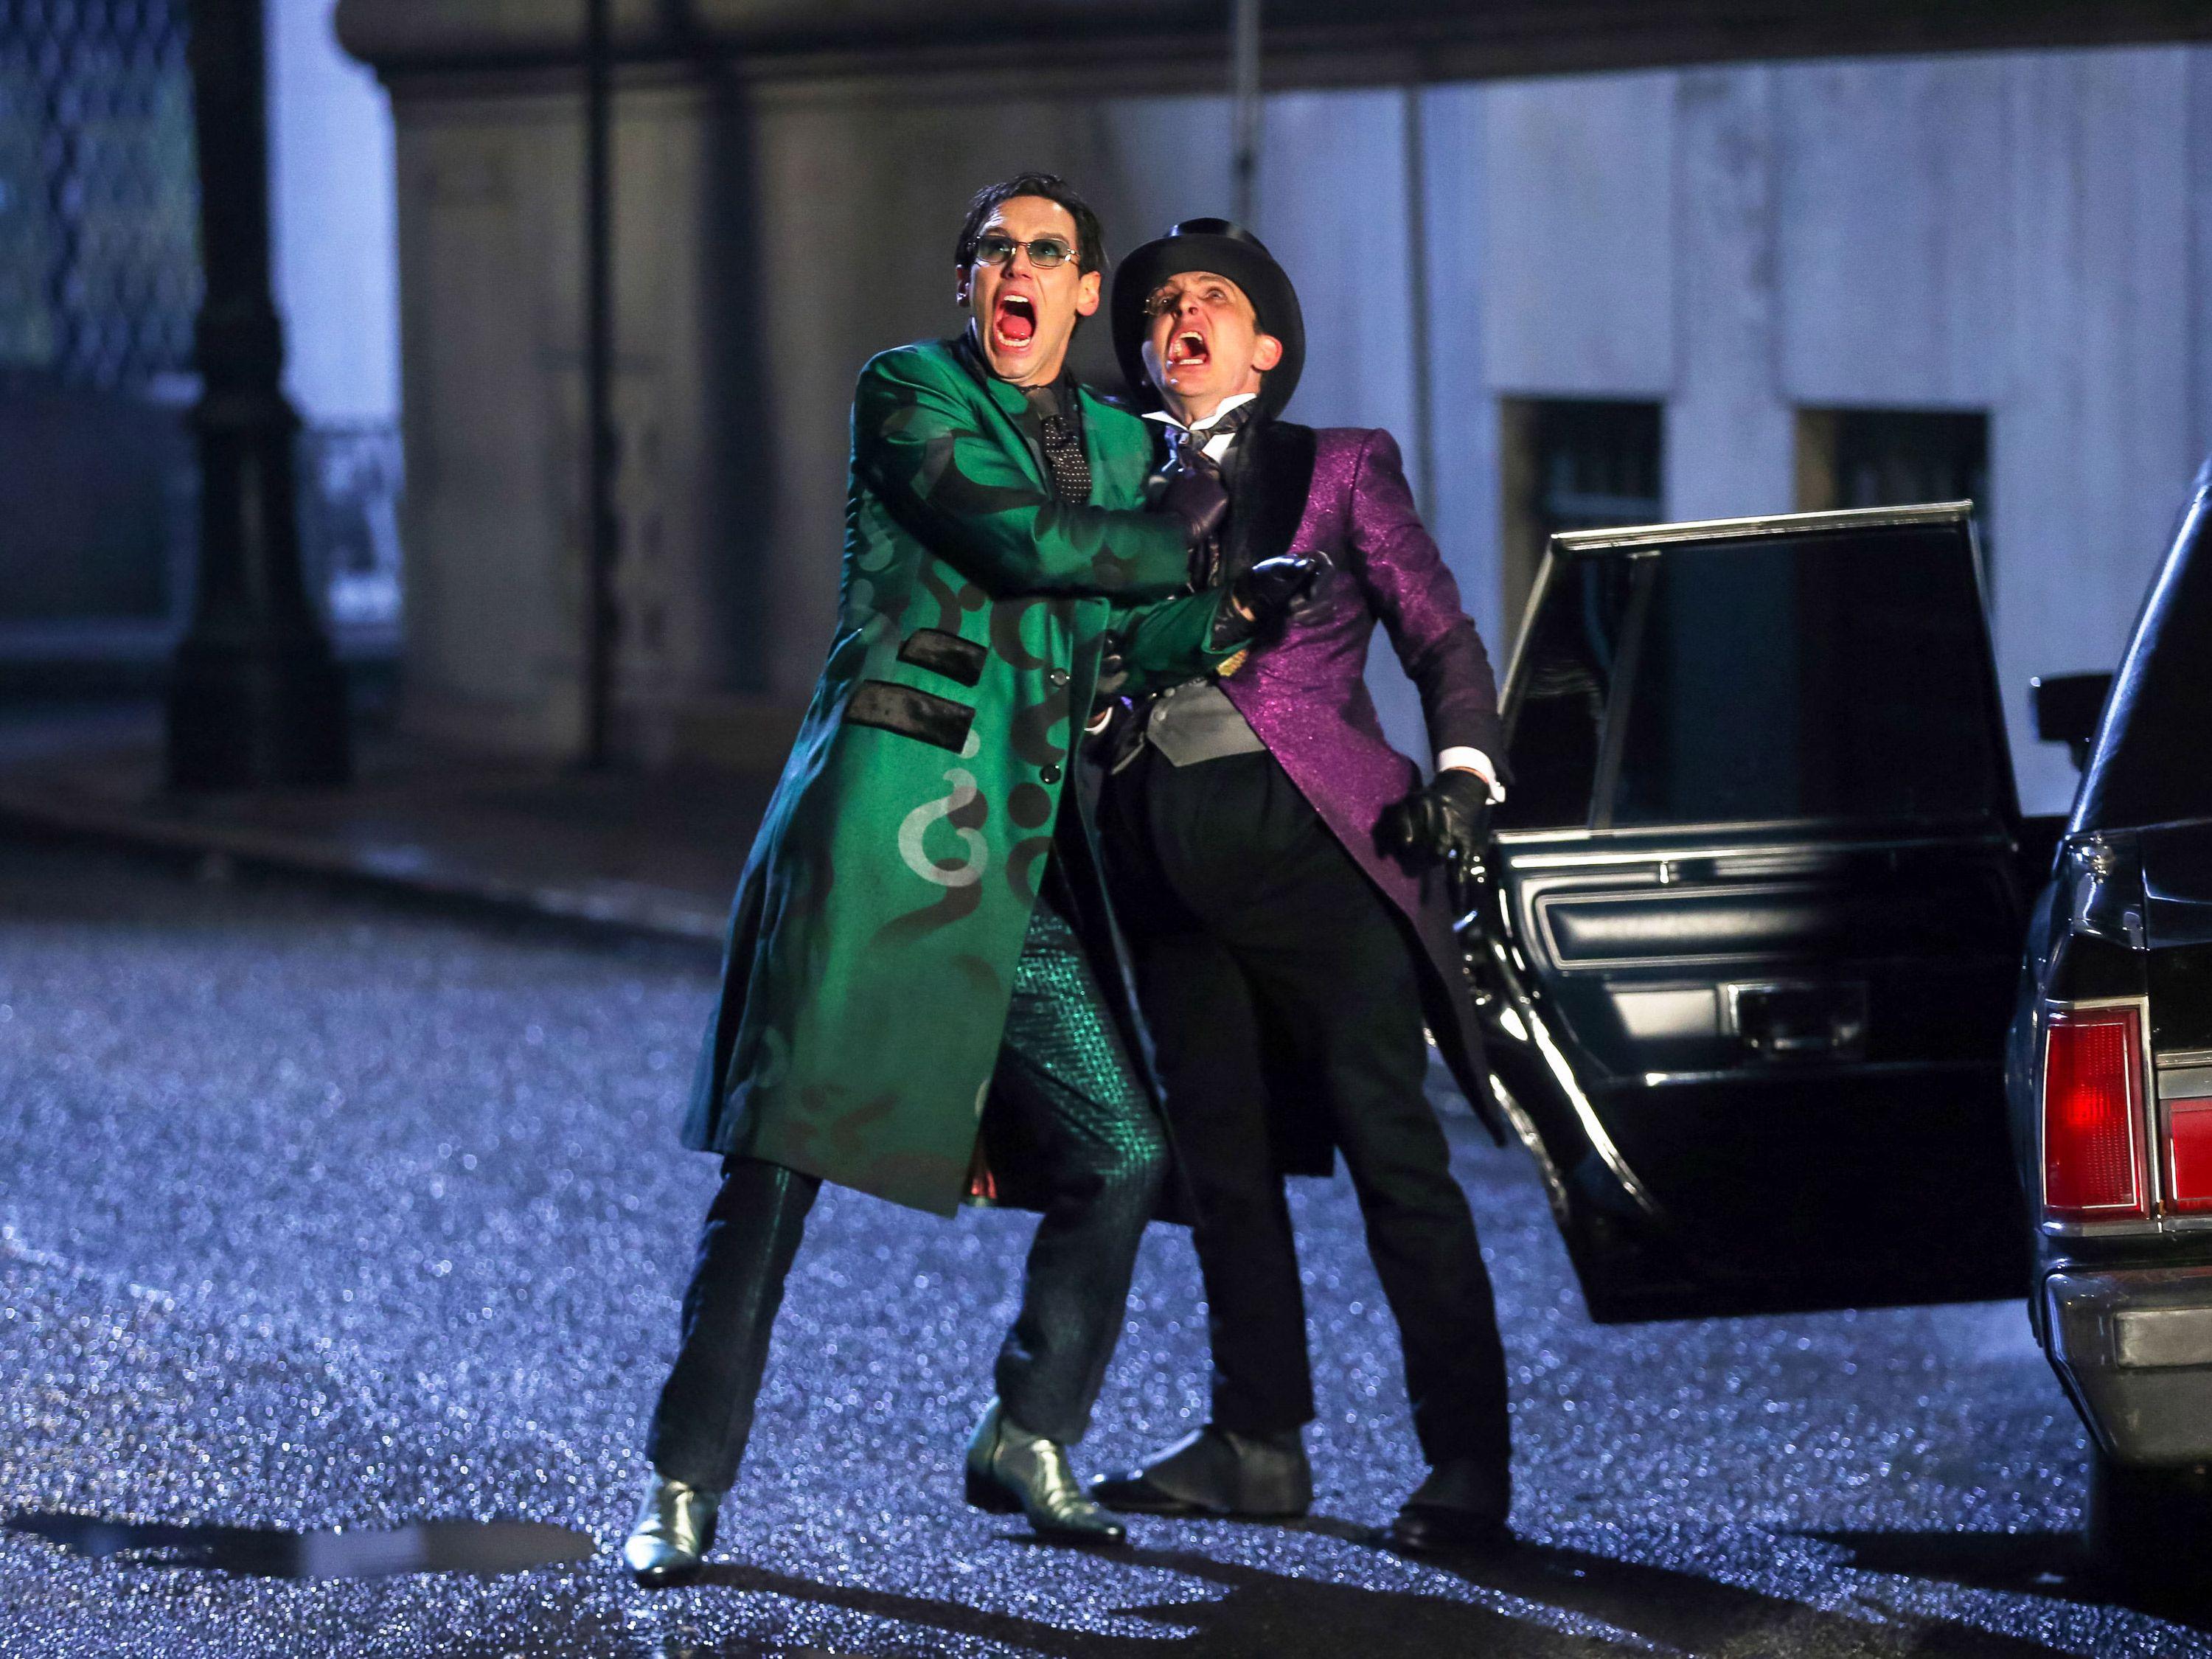 Gotham series finale picture see Riddler and Penguin